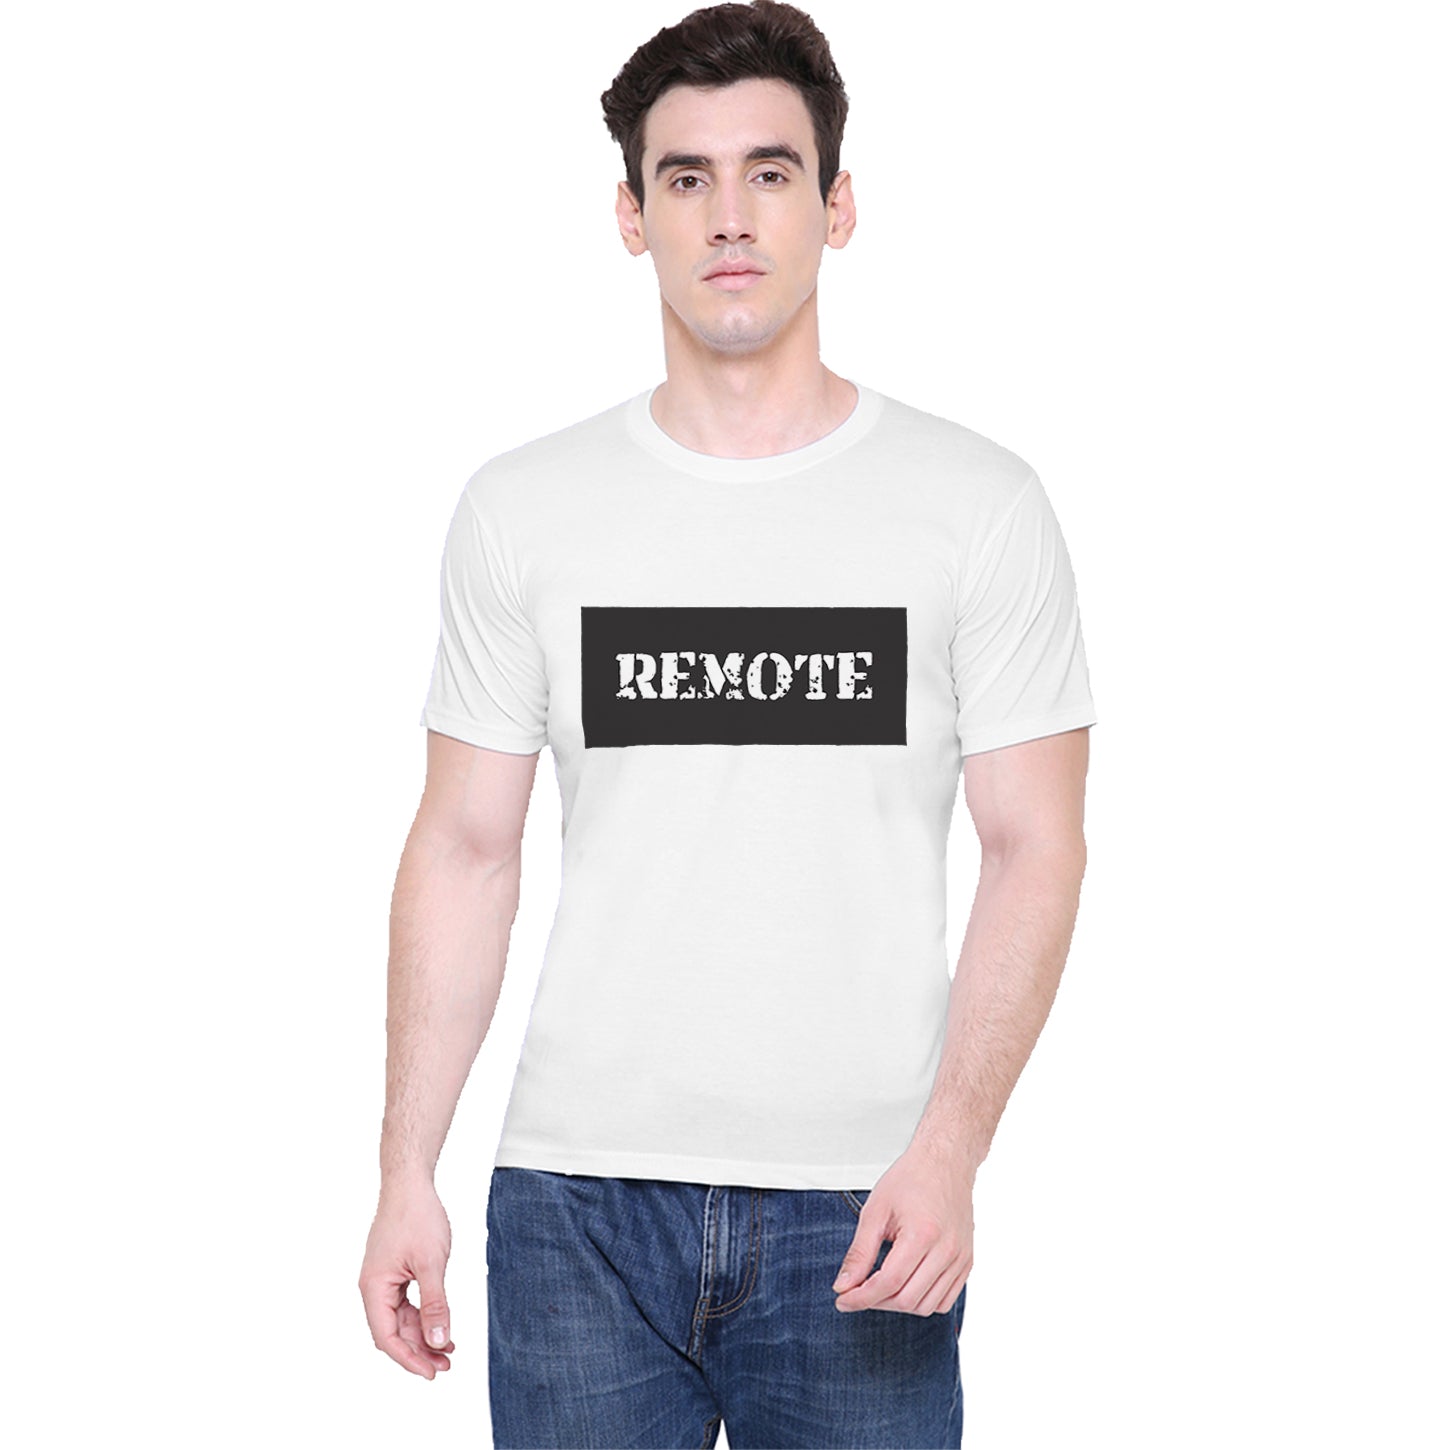 Remote Control matching Couple T shirts- White